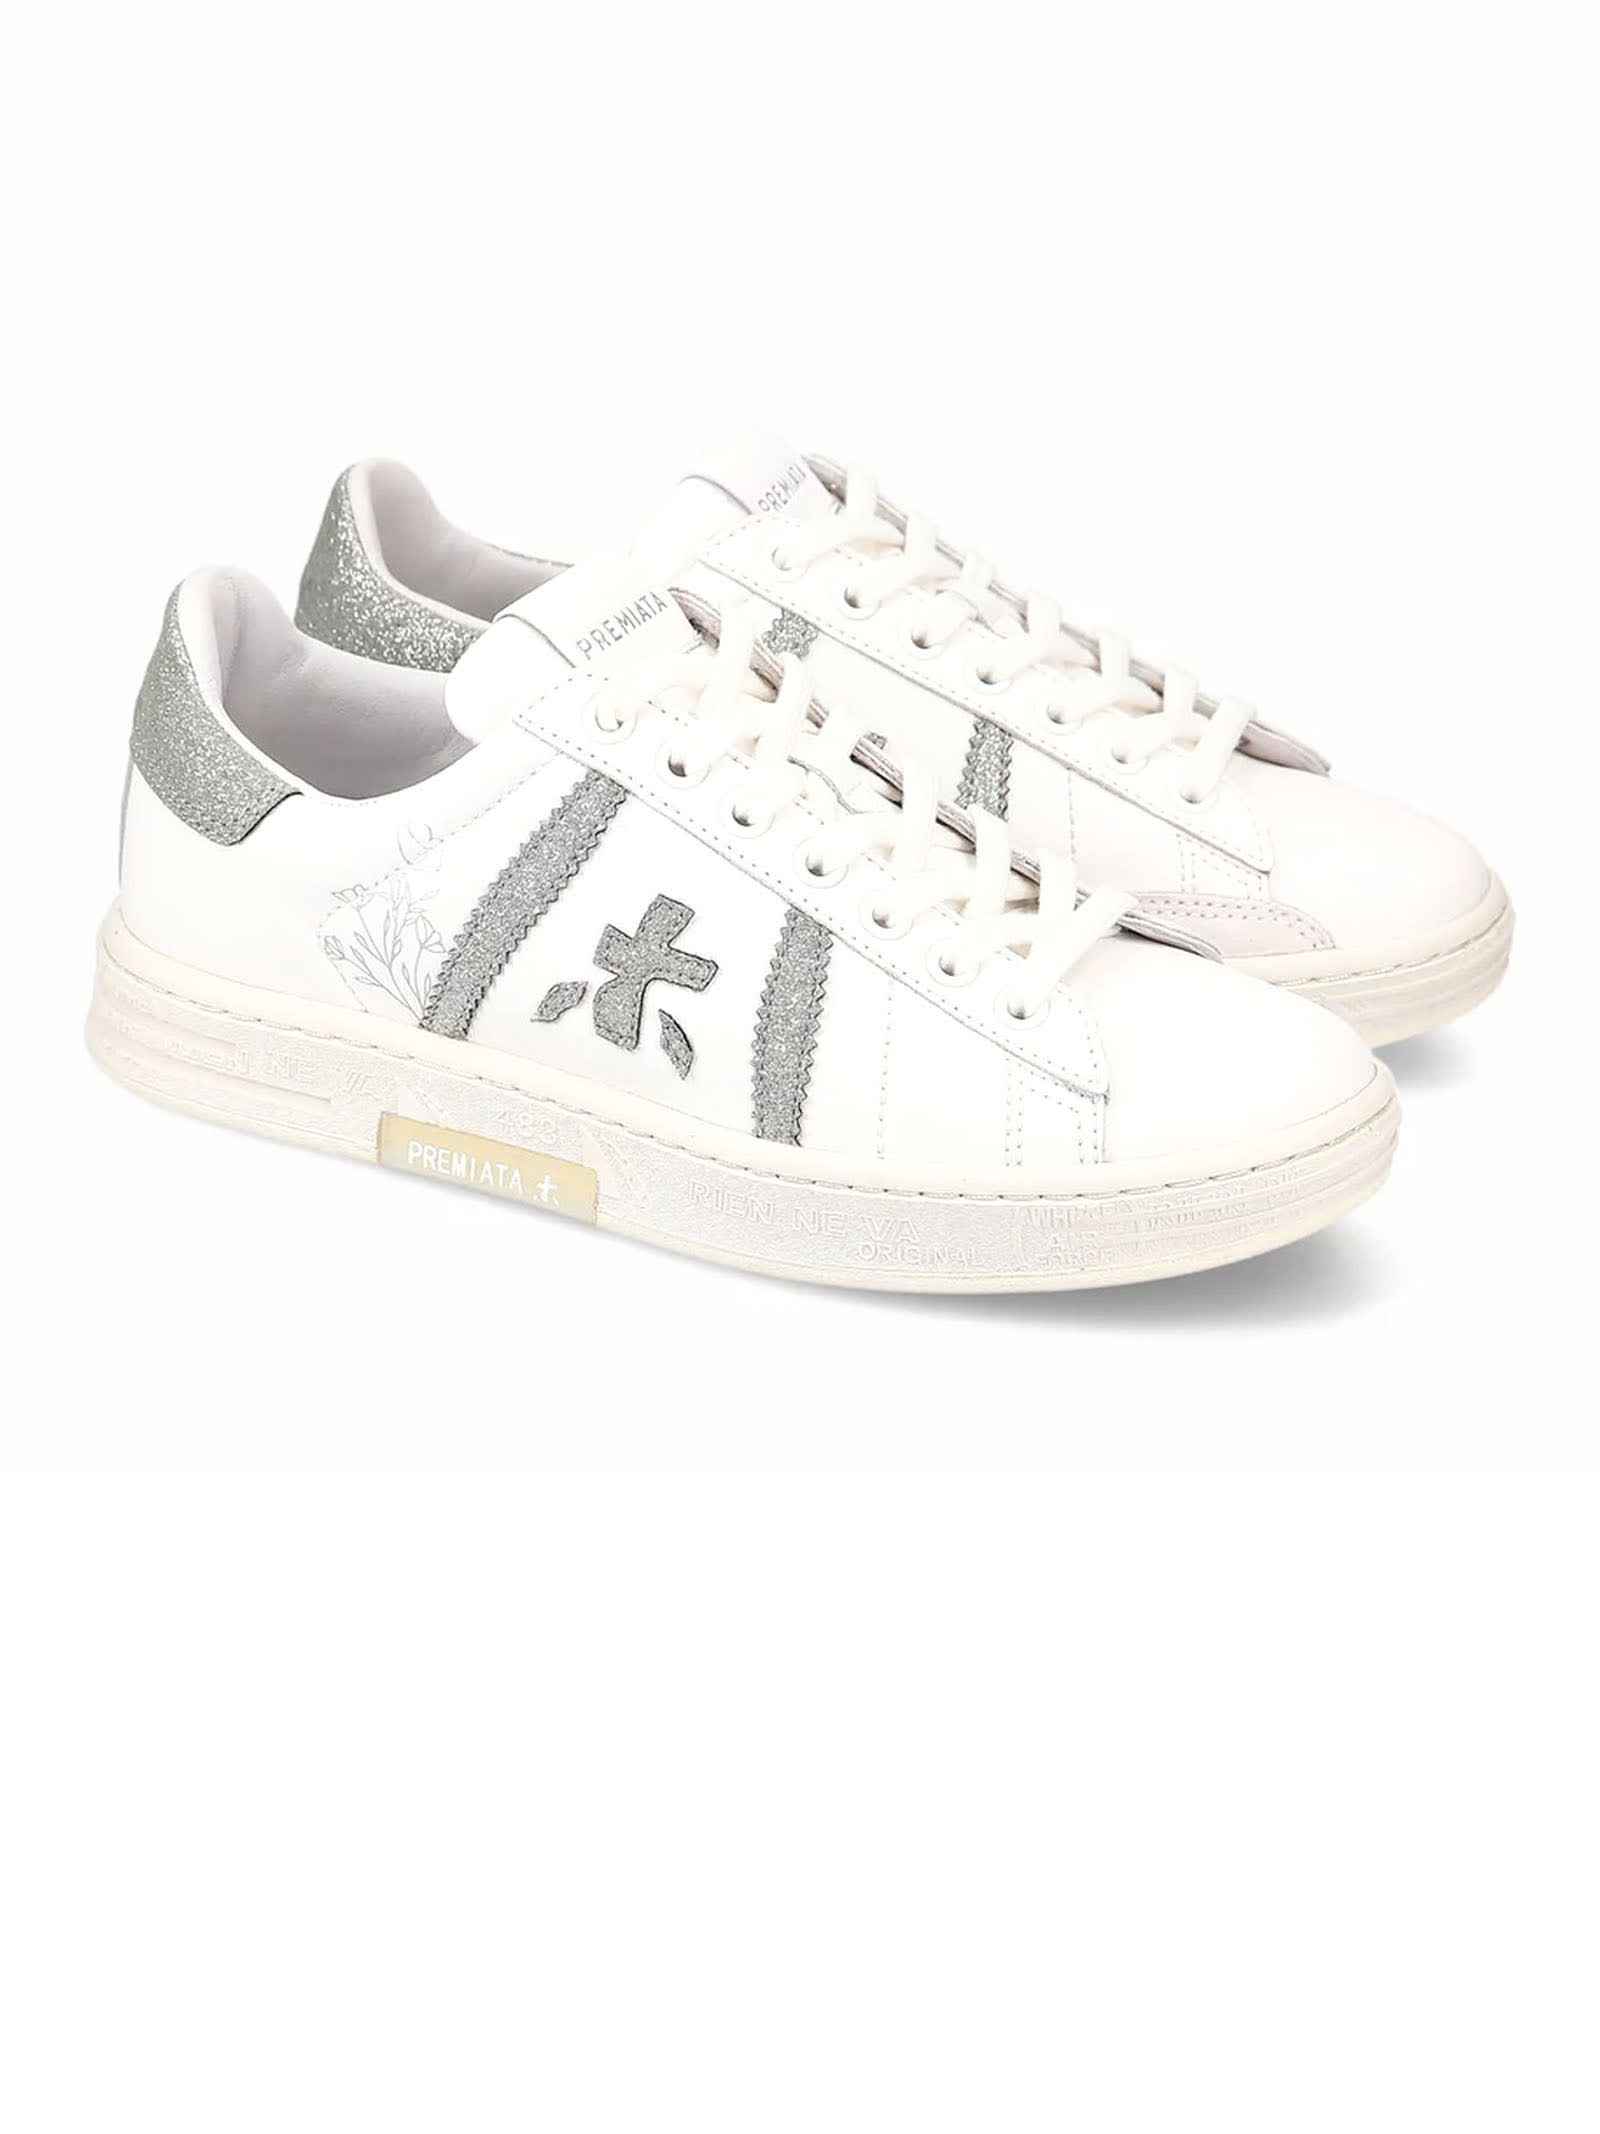 Shop Premiata White Calf Leather Russell Sneakers